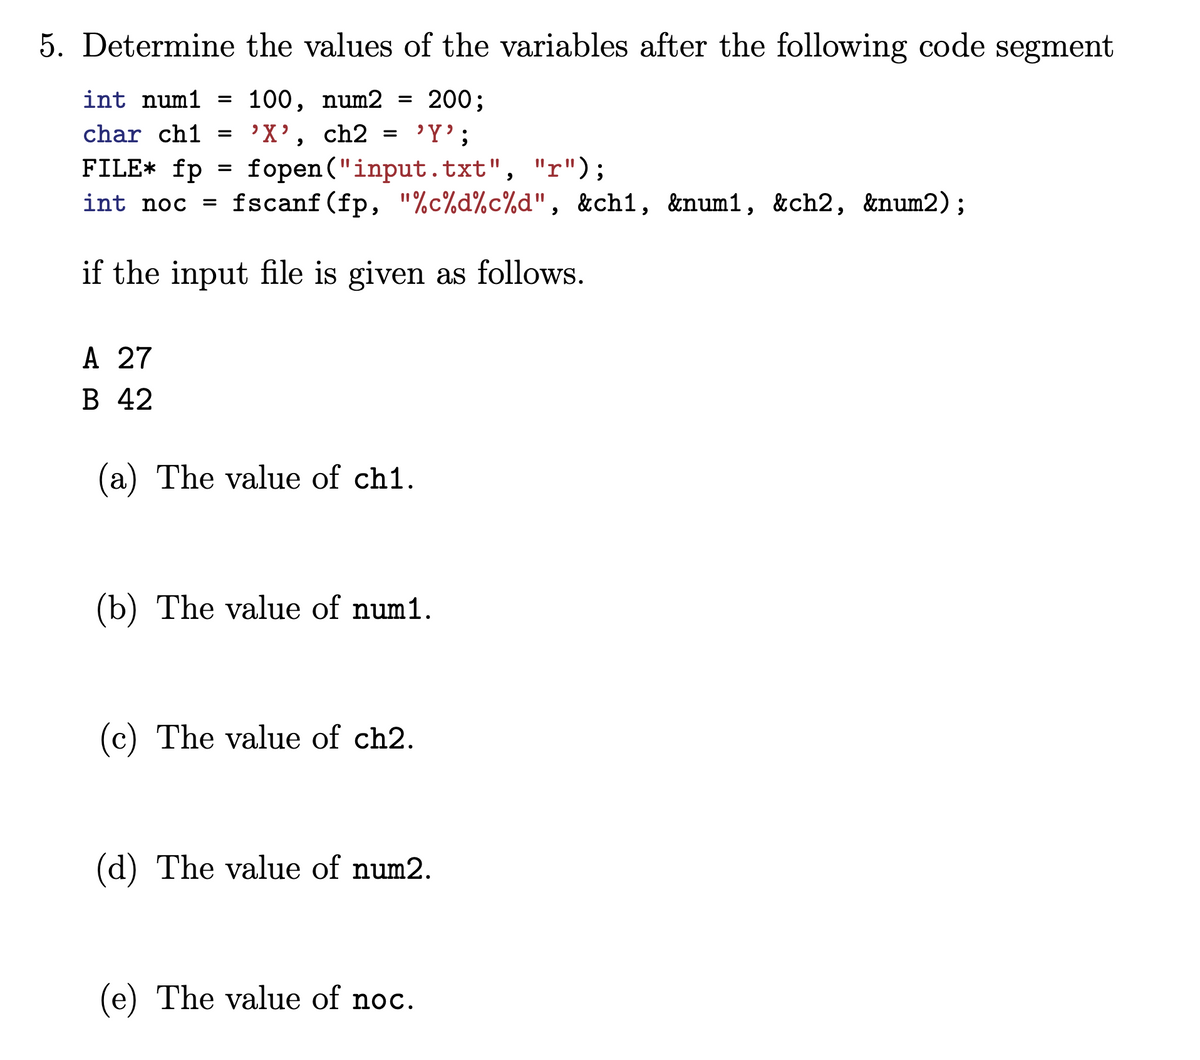 5. Determine the values of the variables after the following code segment
int num1 = 100, num2 = 200;
char ch1 =
'X', ch2
=
'Y';
FILE* fp
=
fopen("input.txt",
"r");
int noc fscanf(fp,"%c%d%c%d", &ch1, &num1, &ch2, &num2);
=
if the input file is given as follows.
A 27
B 42
(a) The value of ch1.
(b) The value of num1.
(c) The value of ch2.
(d) The value of num2.
(e) The value of noc.